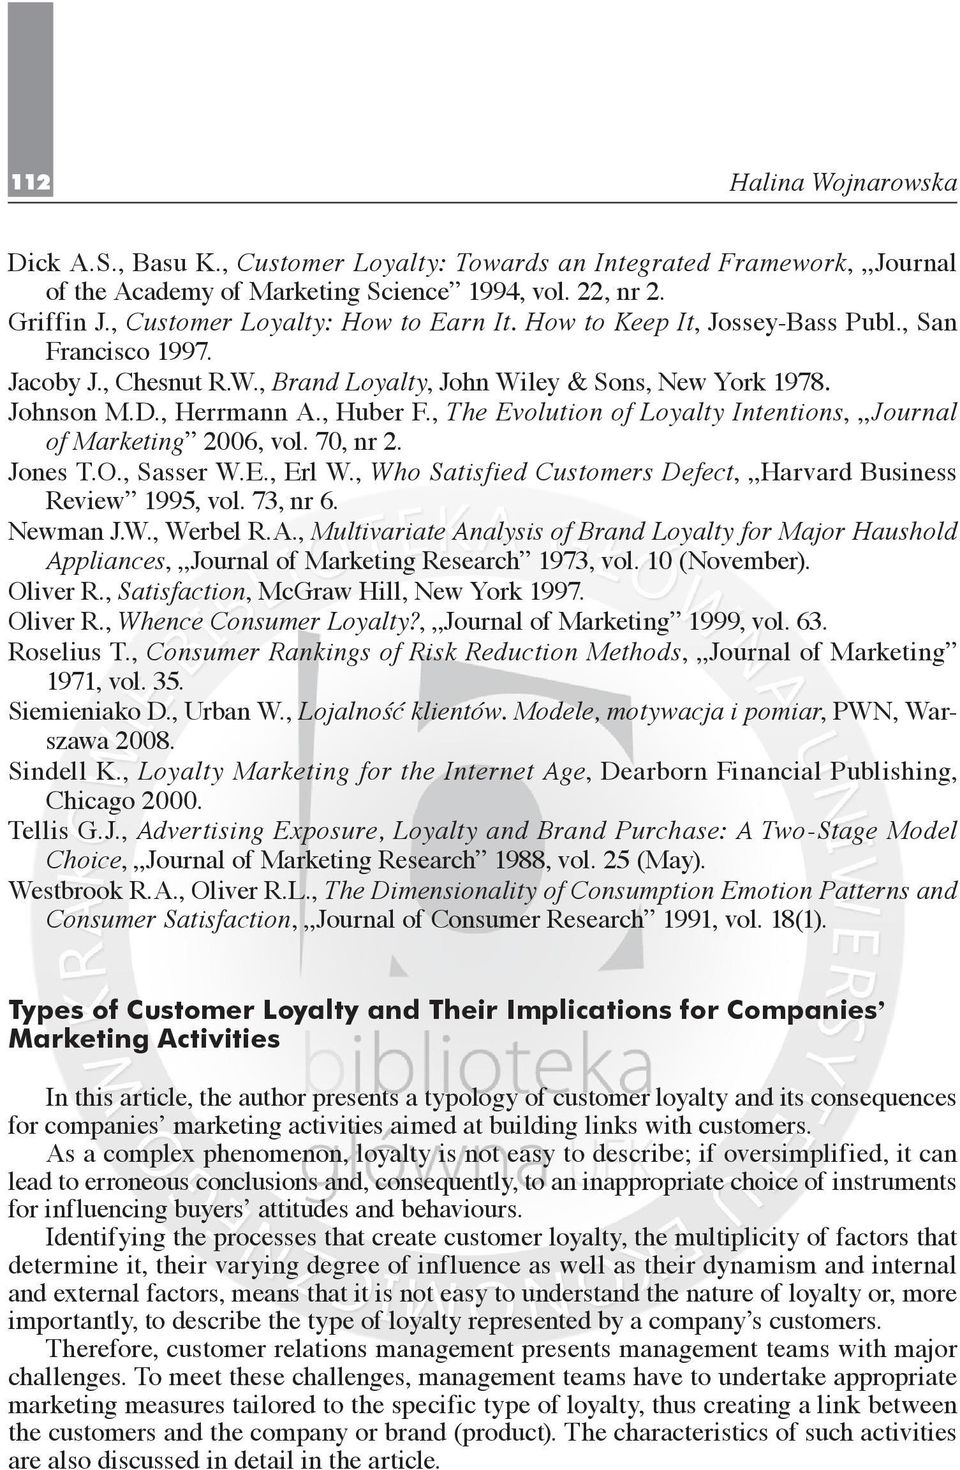 , The Evolution of Loyalty Intentions, Journal of Marketing 2006, vol. 70, nr 2. Jones T.O., Sasser W.E., Erl W., Who Satisfied Customers Defect, Harvard Business Review 1995, vol. 73, nr 6. Newman J.